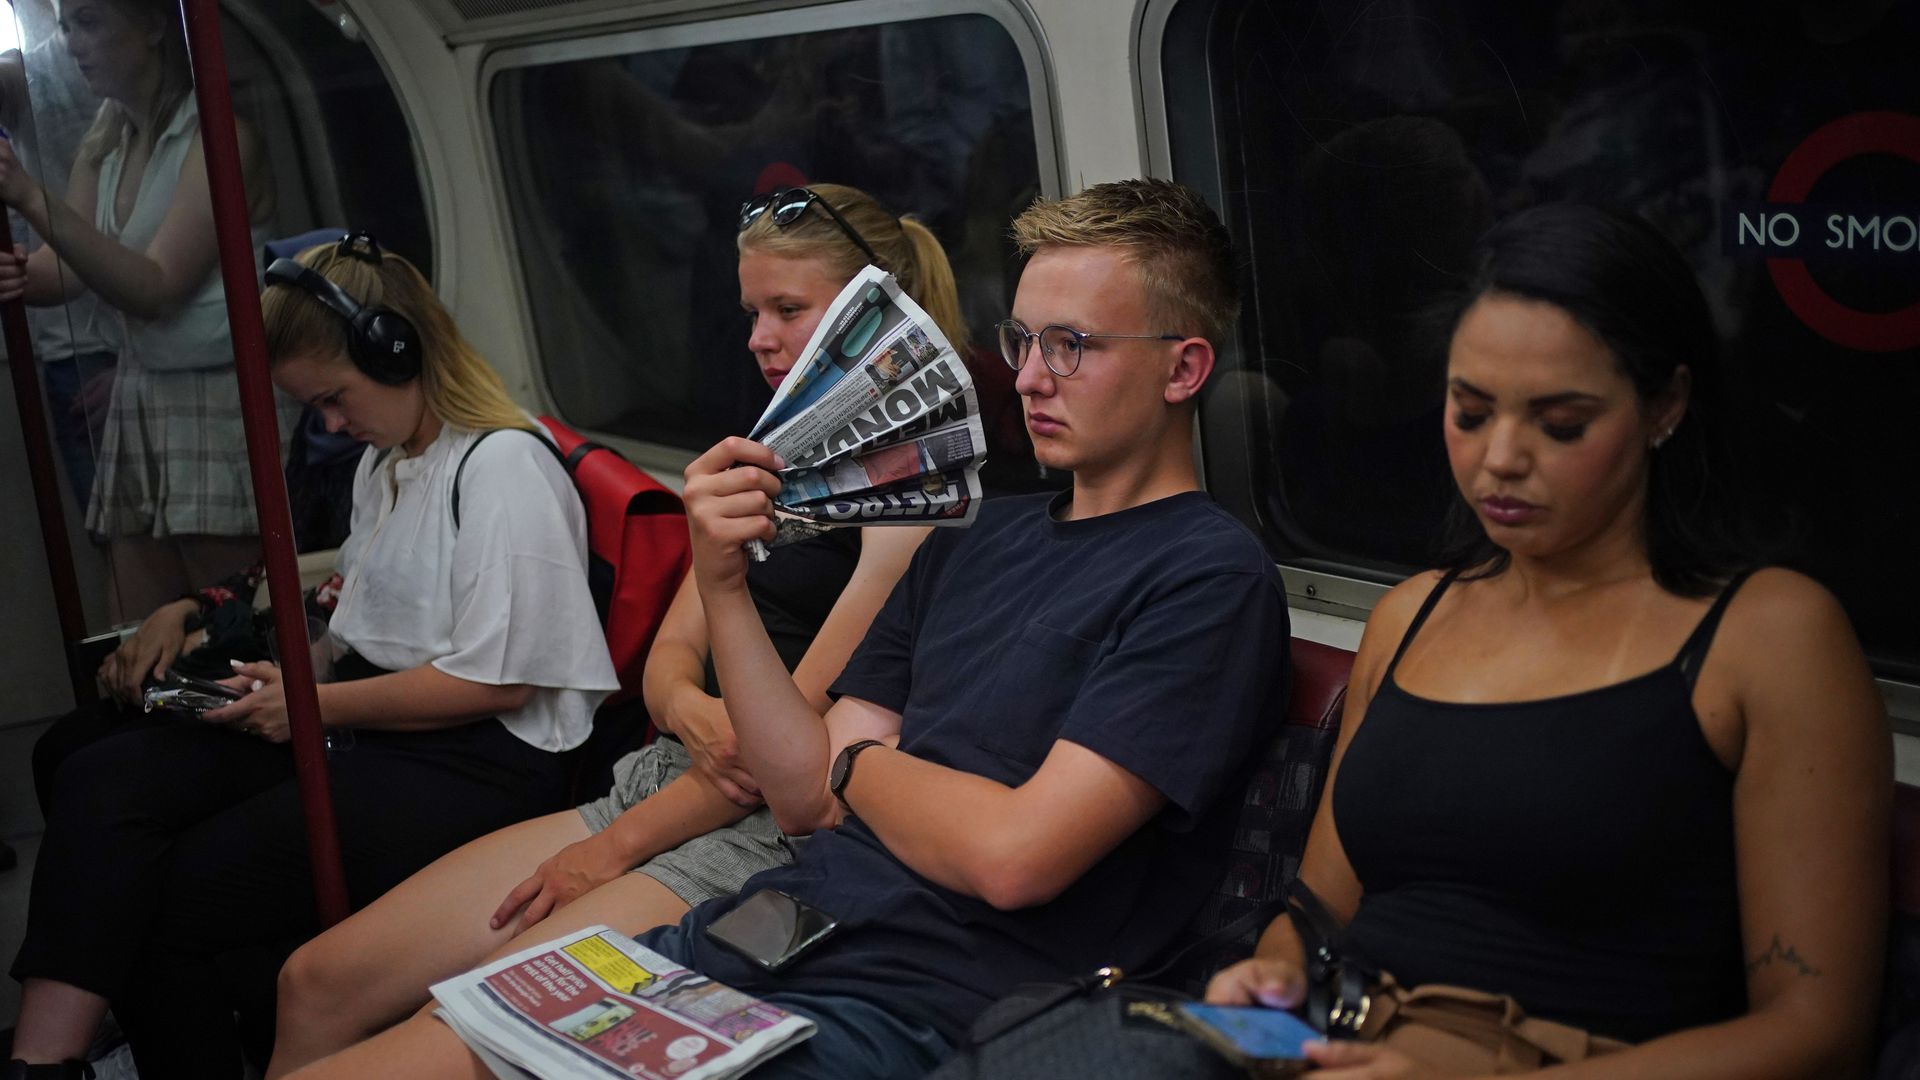 Man on London subway fans himself with newspaper during a heat wave.